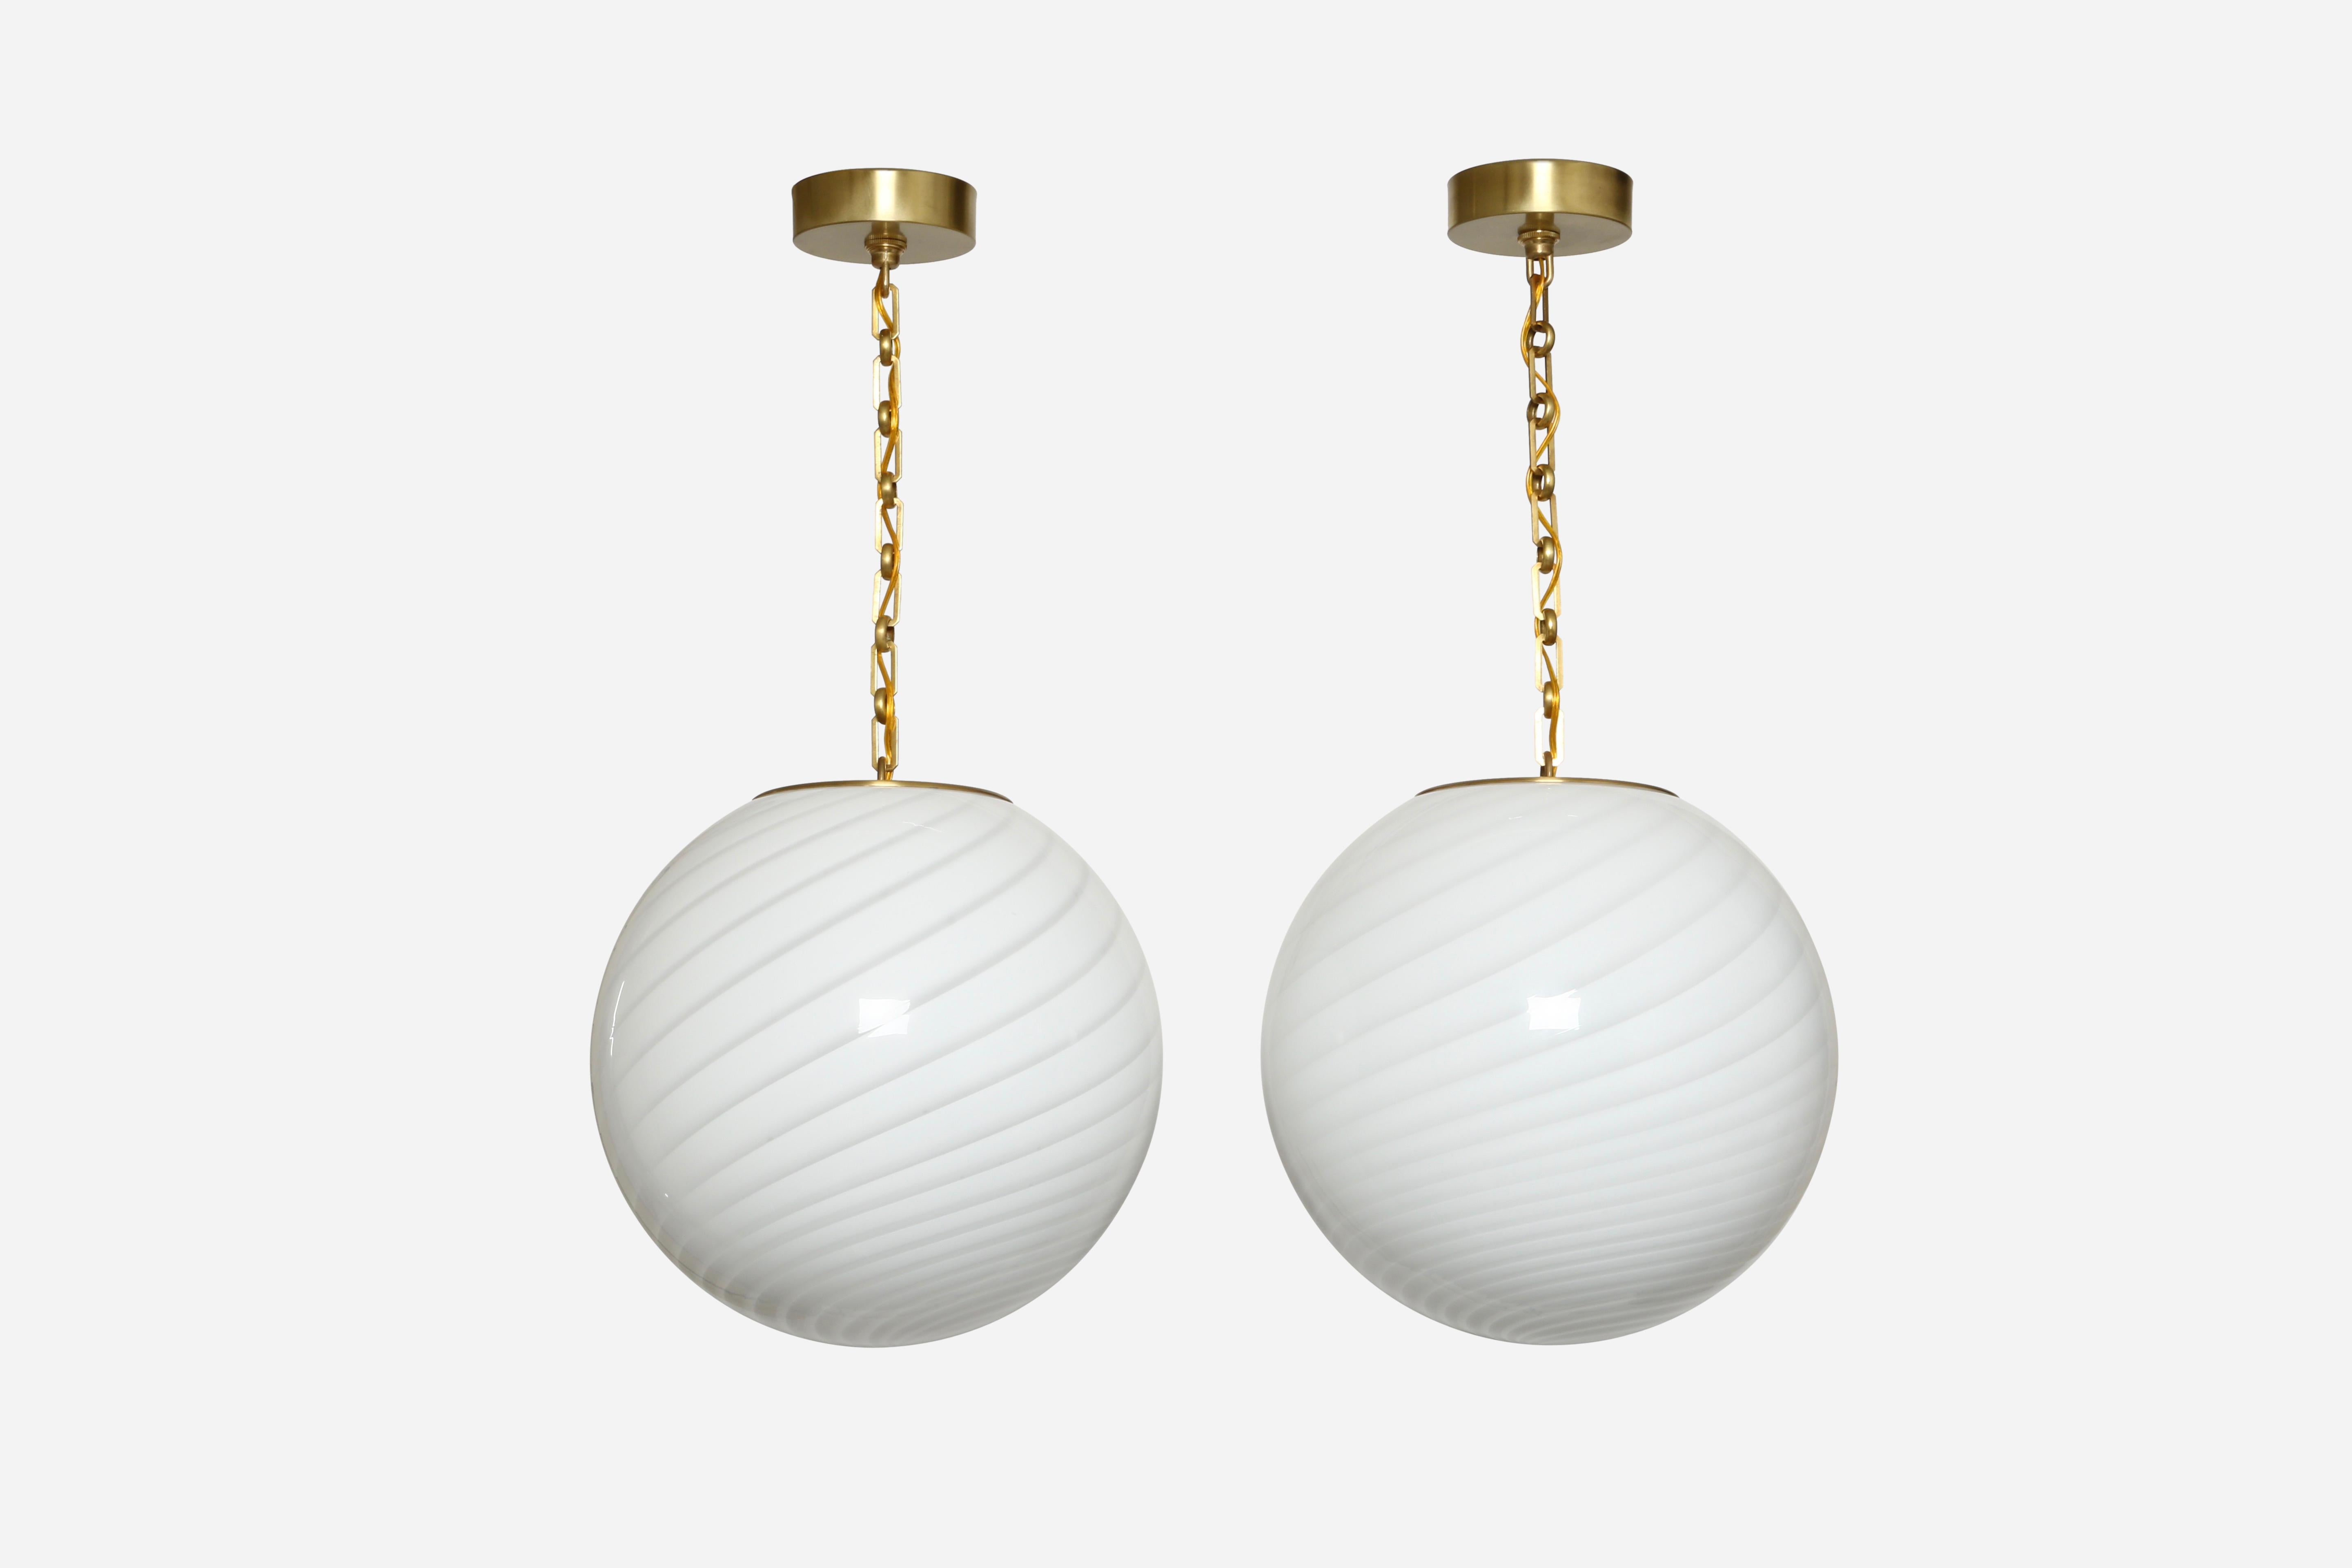 Murano glass ceiling pendants
Made for us exclusively in Italy
Hand blown glass, custom finished metal
Available in brass or patinated brass
Italy 2021
Rewired for US.
Overall drop is adjustable. Chain can be made shorter or longer.
Priced per